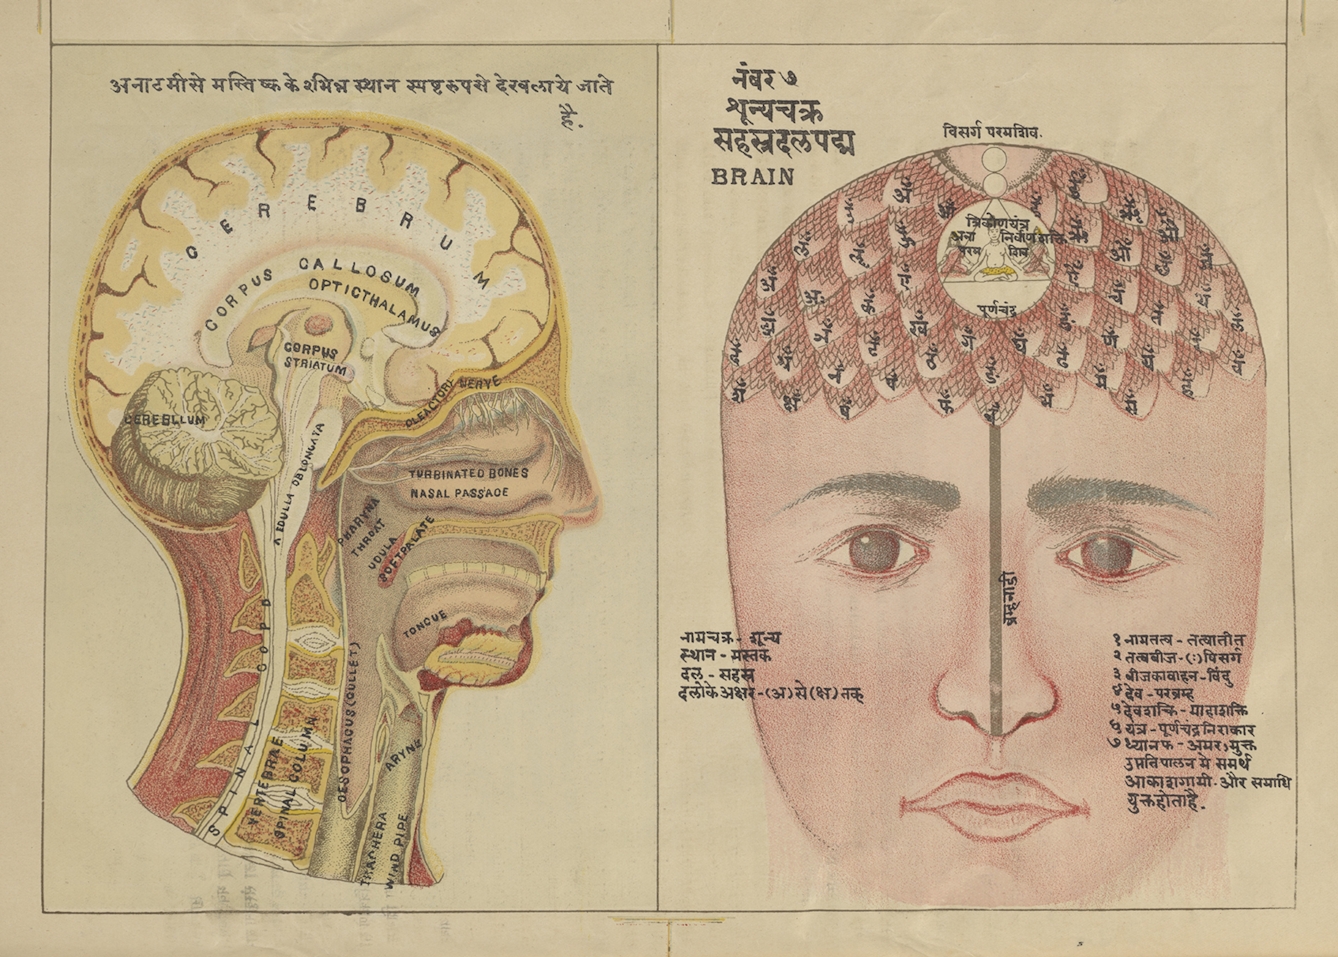 This colour illustration juxtaposes the yogic and the medical/anatomical view of the brain.